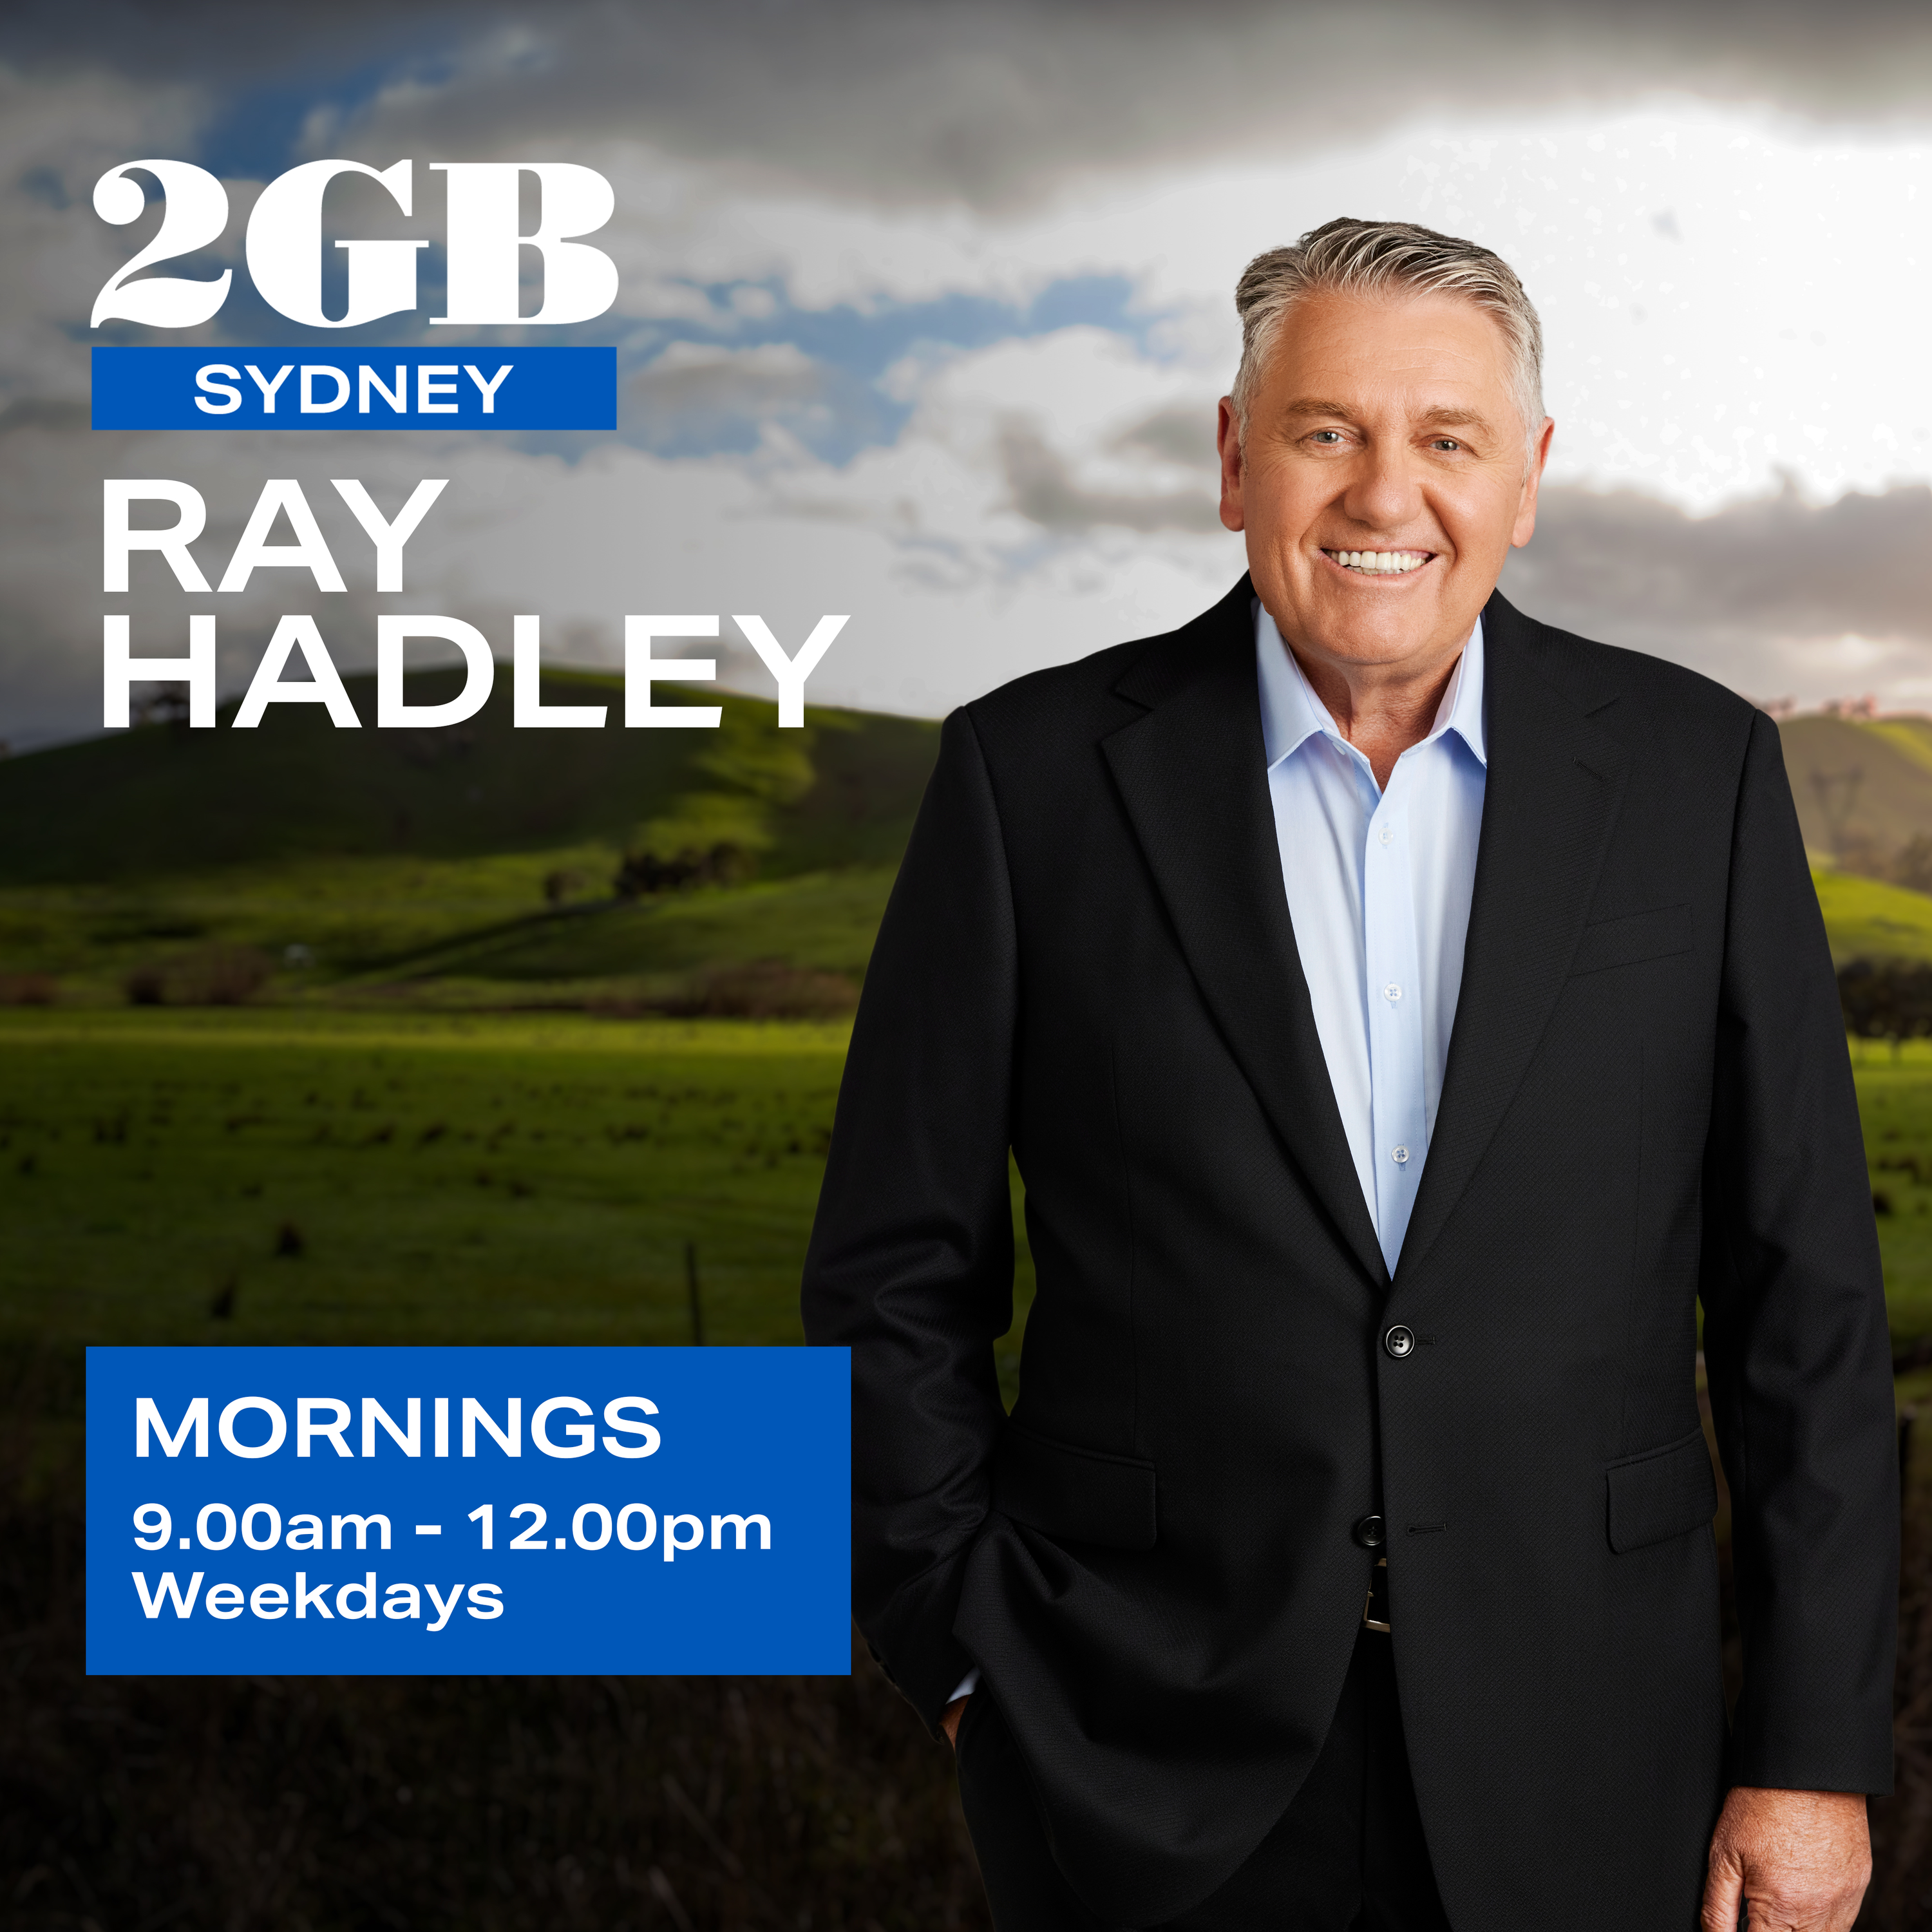 The Ray Hadley Morning Show with Mark Levy - Full Show, January 15th